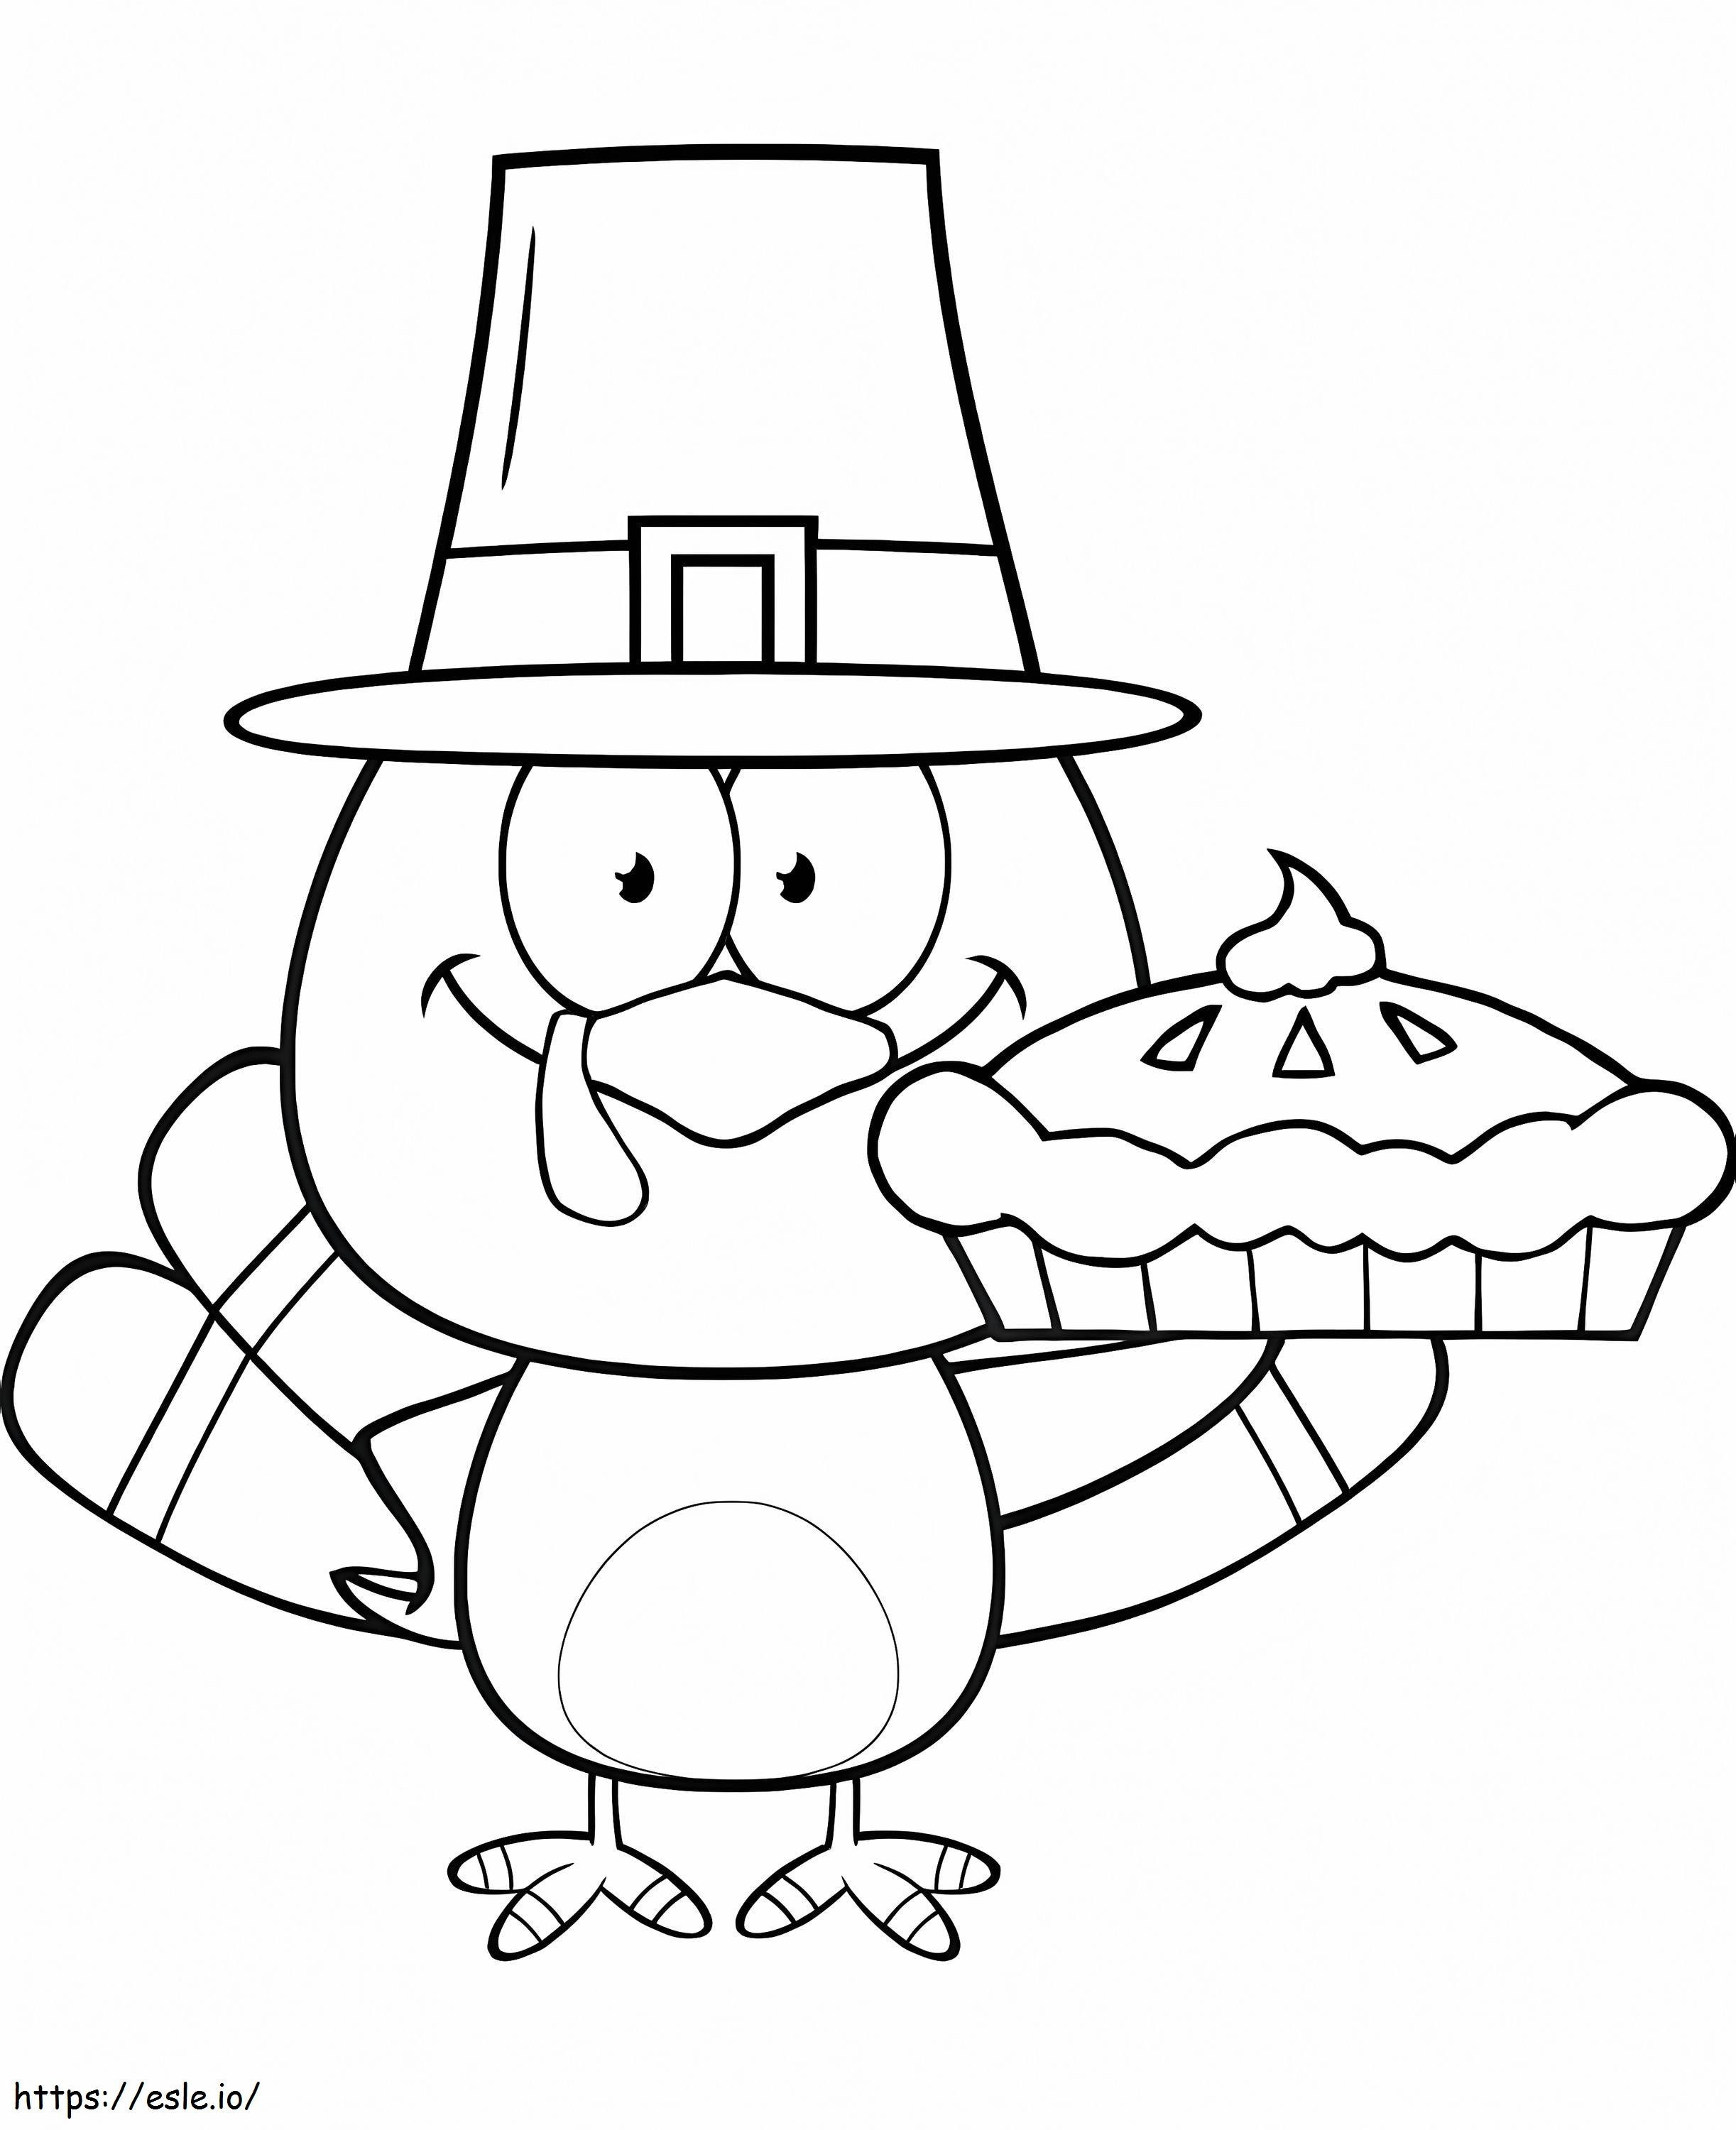 Turkey Holding A Cake coloring page